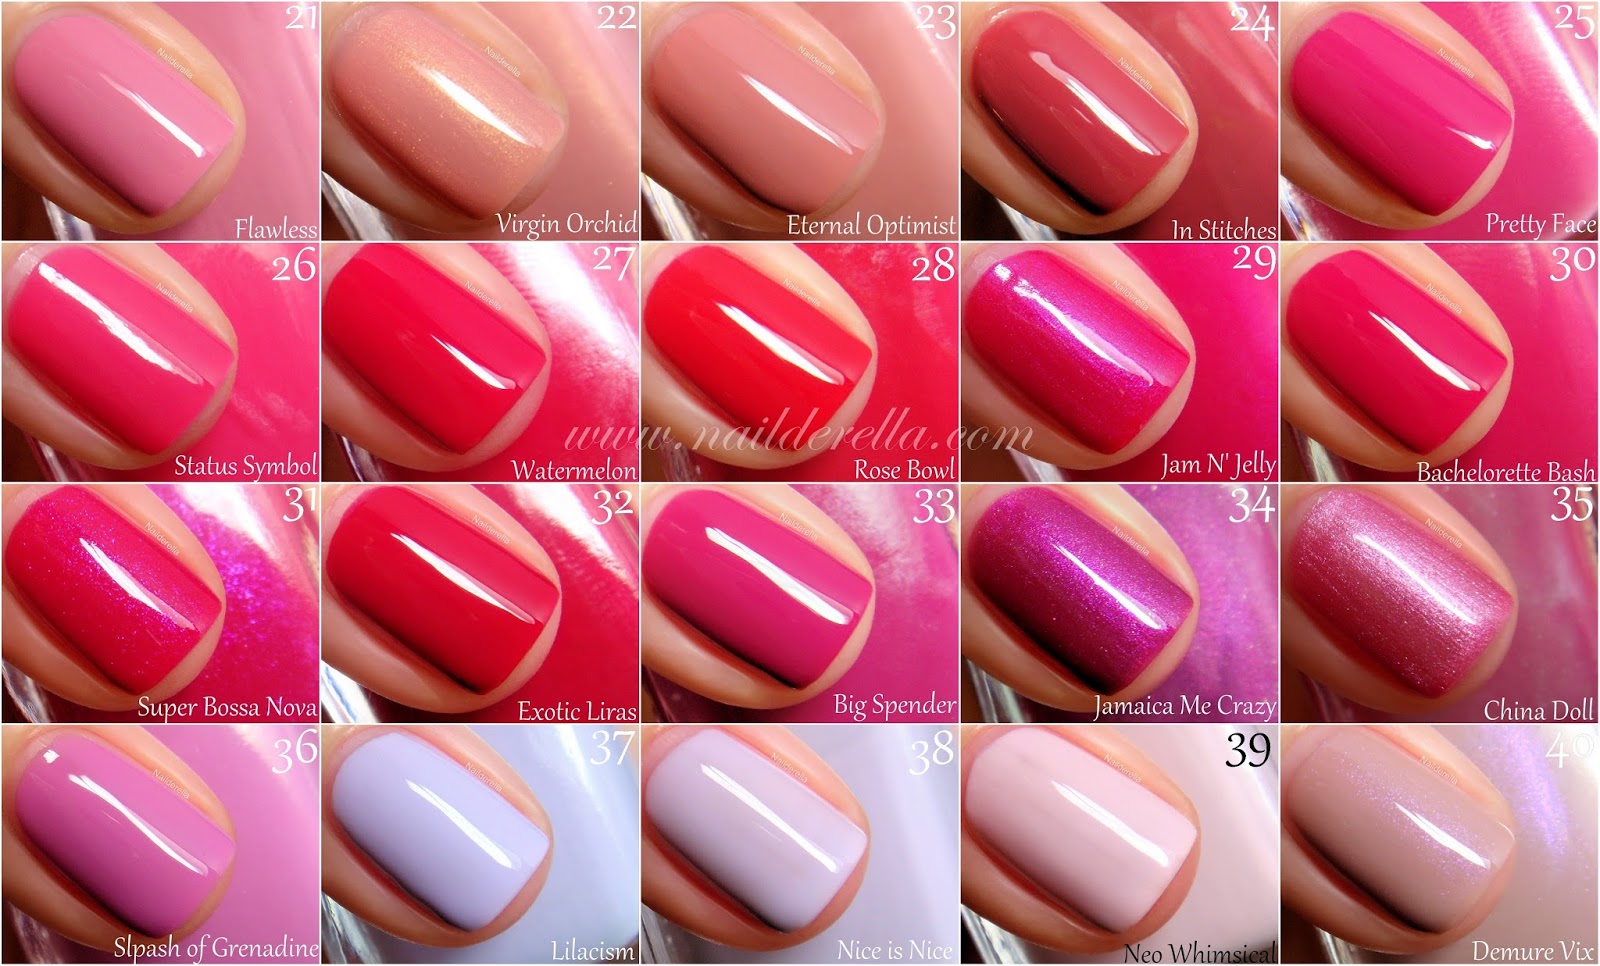 3. Top Essie Nail Colors for Spring - wide 3